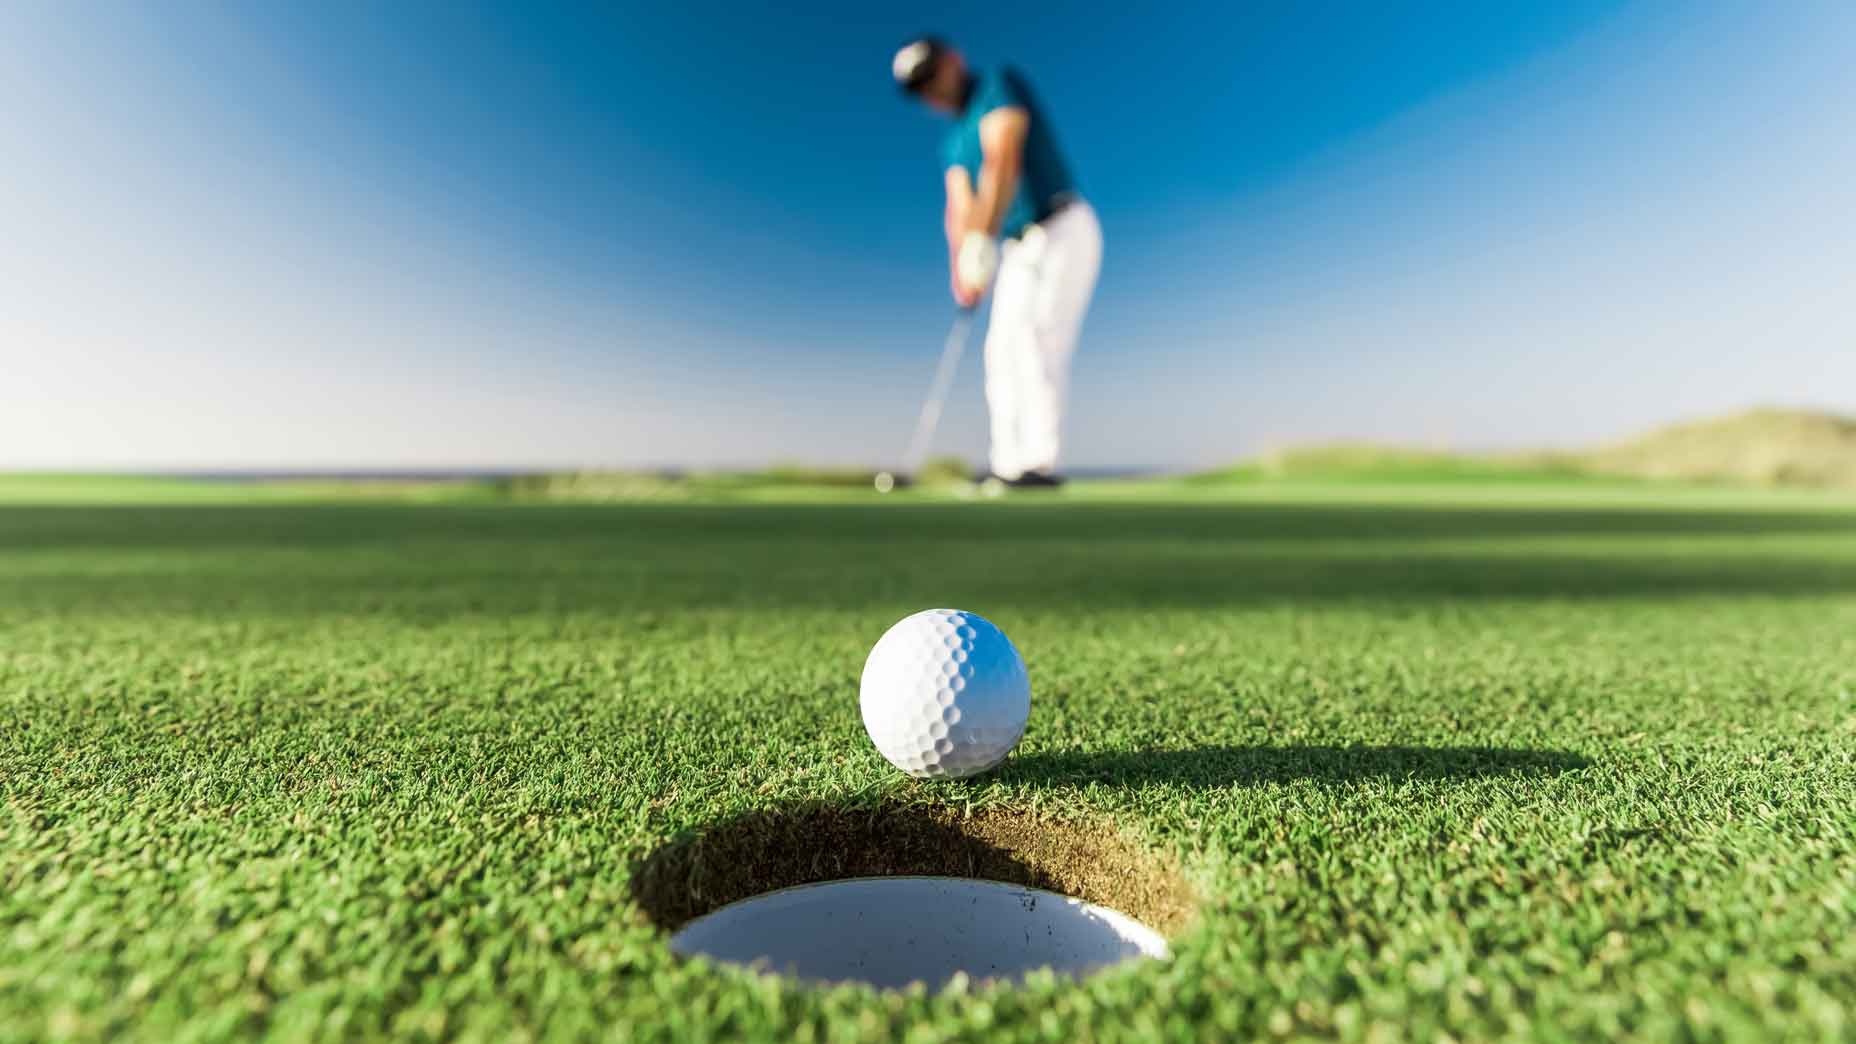 a golfer putts a golf ball into a hole from a long distance on a golf course